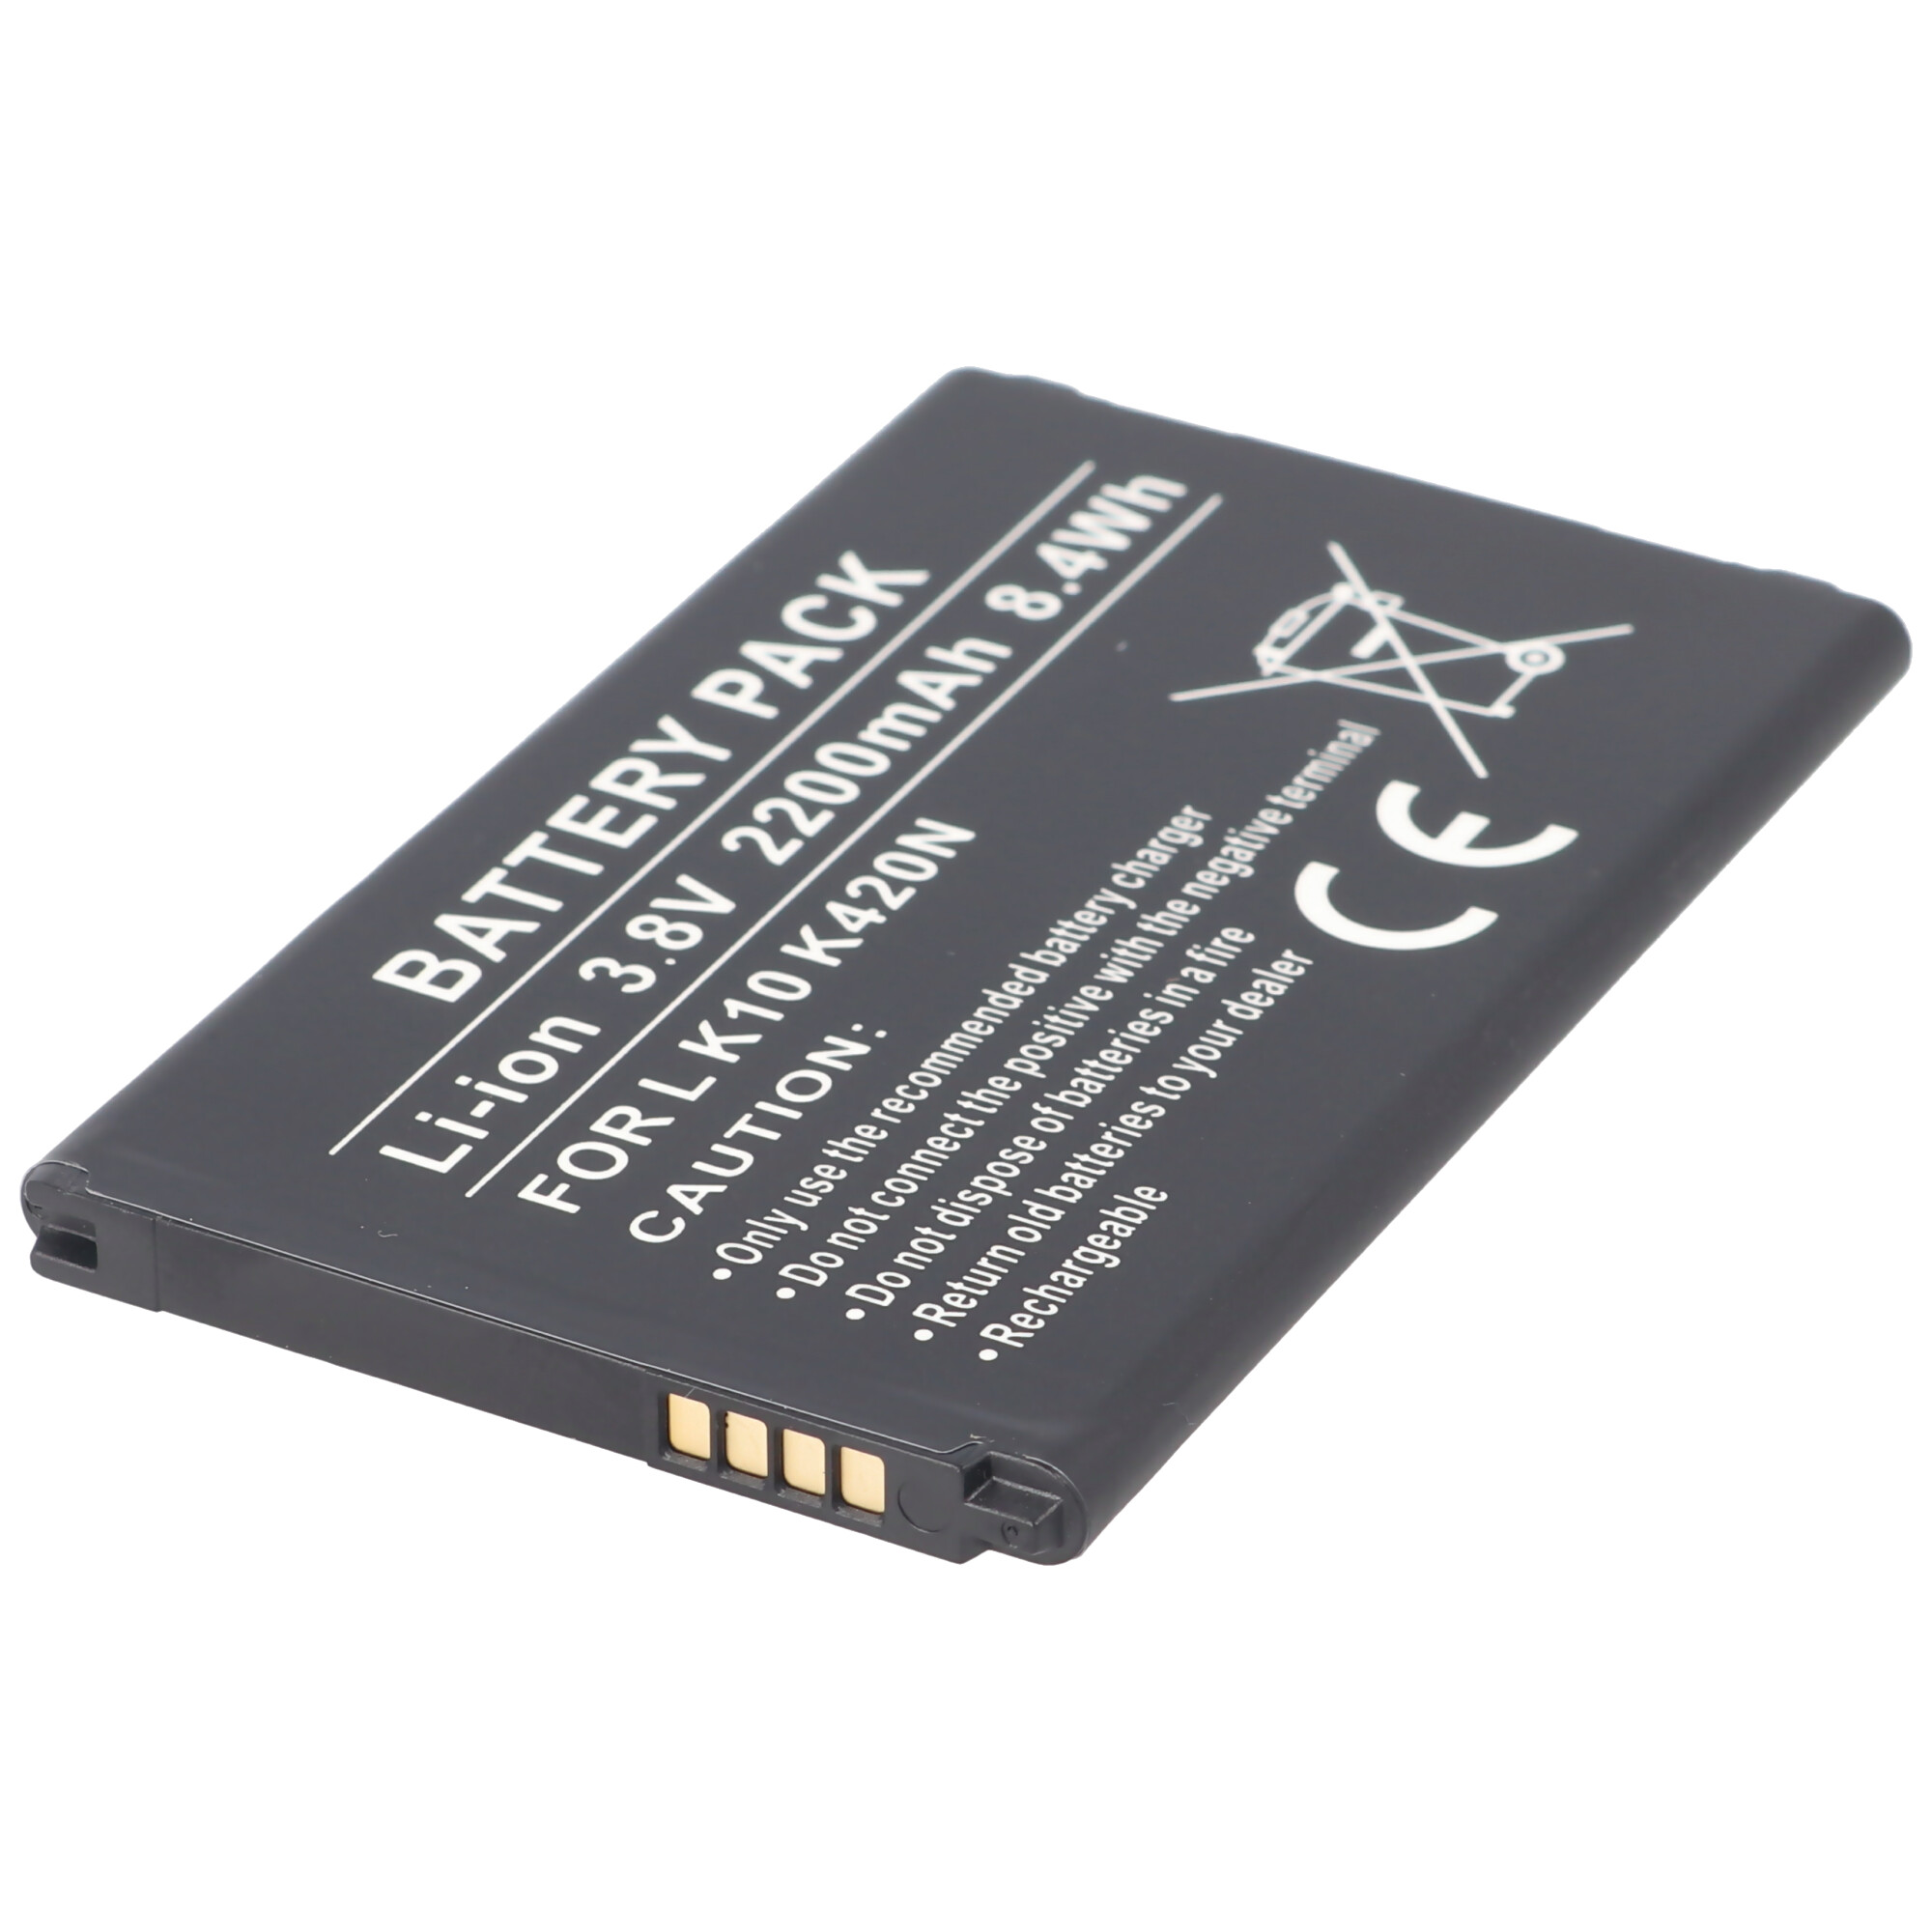 Akku passend für LG K10 K420N, BL-45A1H, EAC63158301, Li-Ion, 3,8V, 2200mAh, 8,4Wh, incl. IC chip